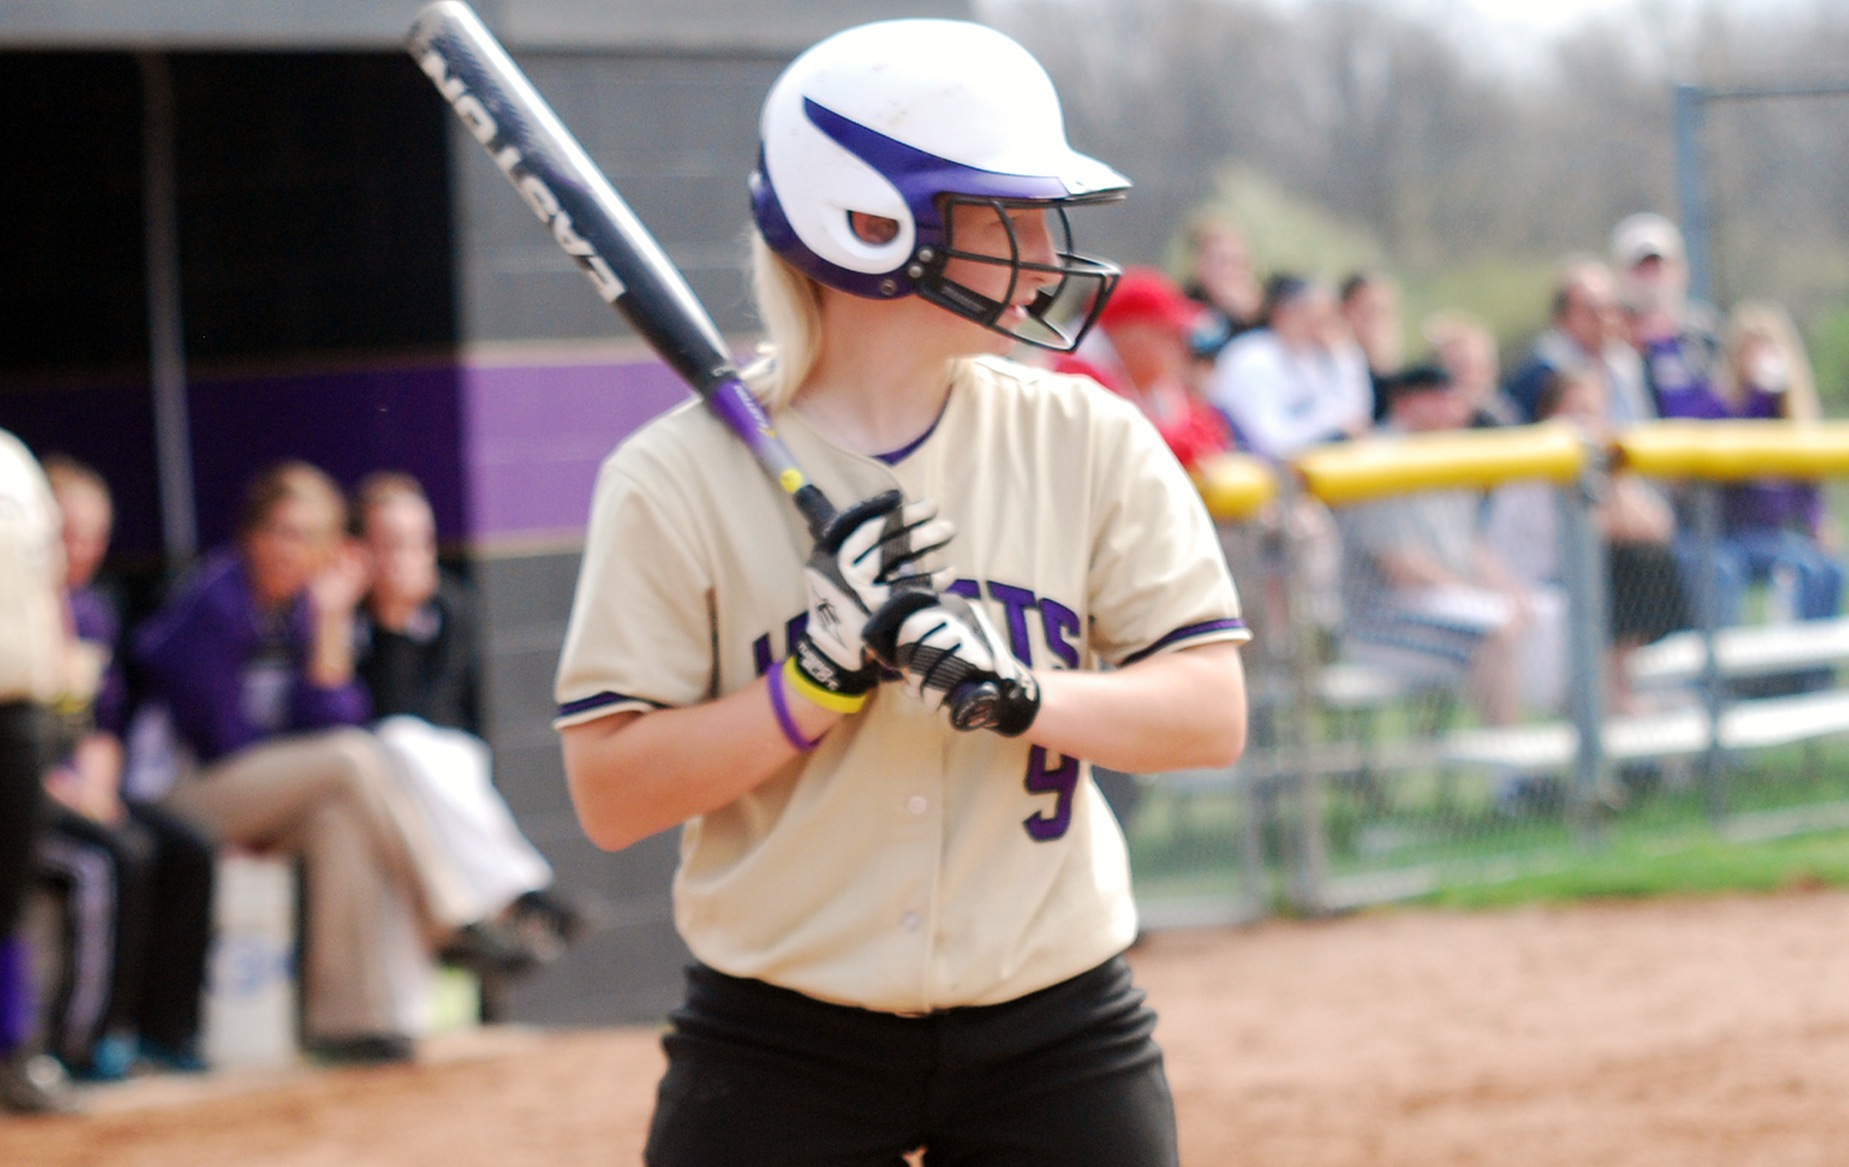 DC Softball Dominates in First Games of 2013 Campaign